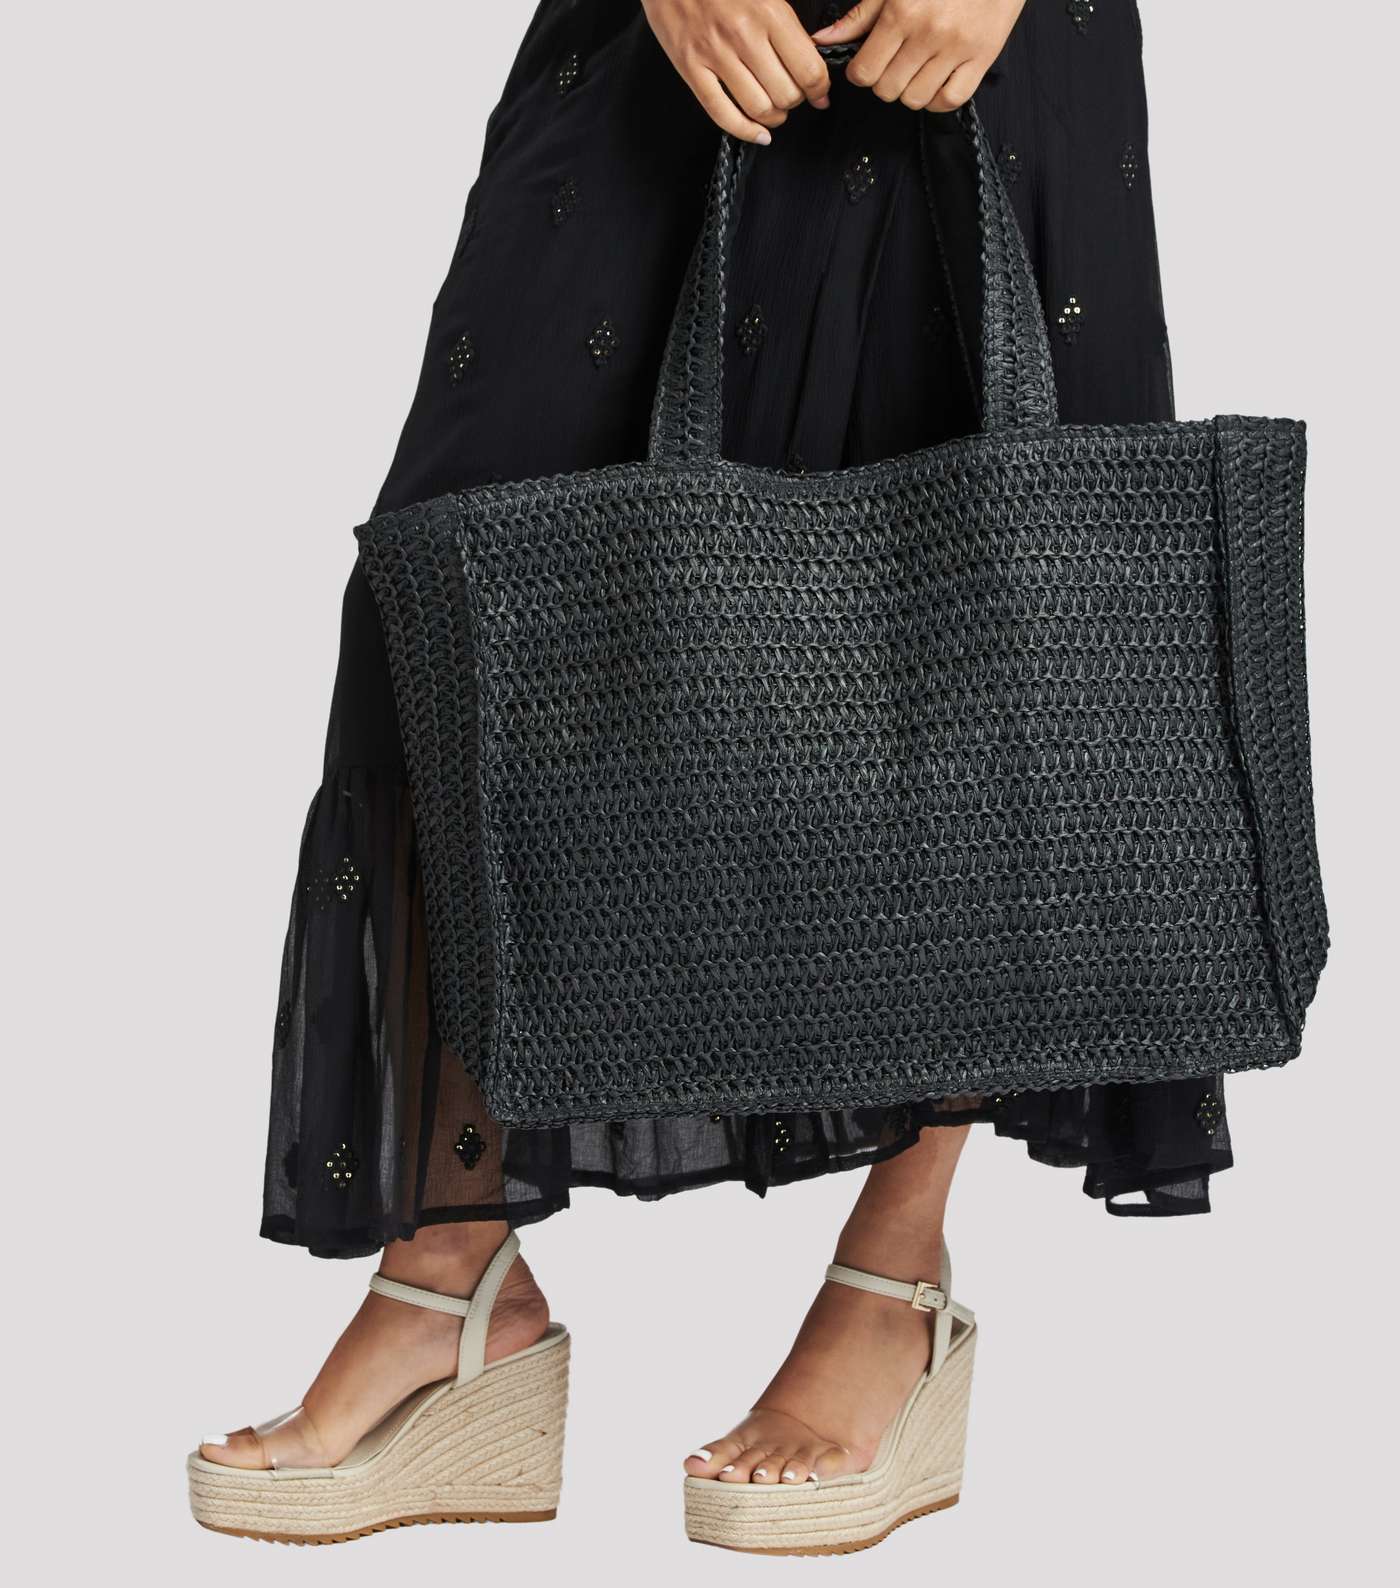 South Beach Black Woven Straw Effect Tote Bag Image 2